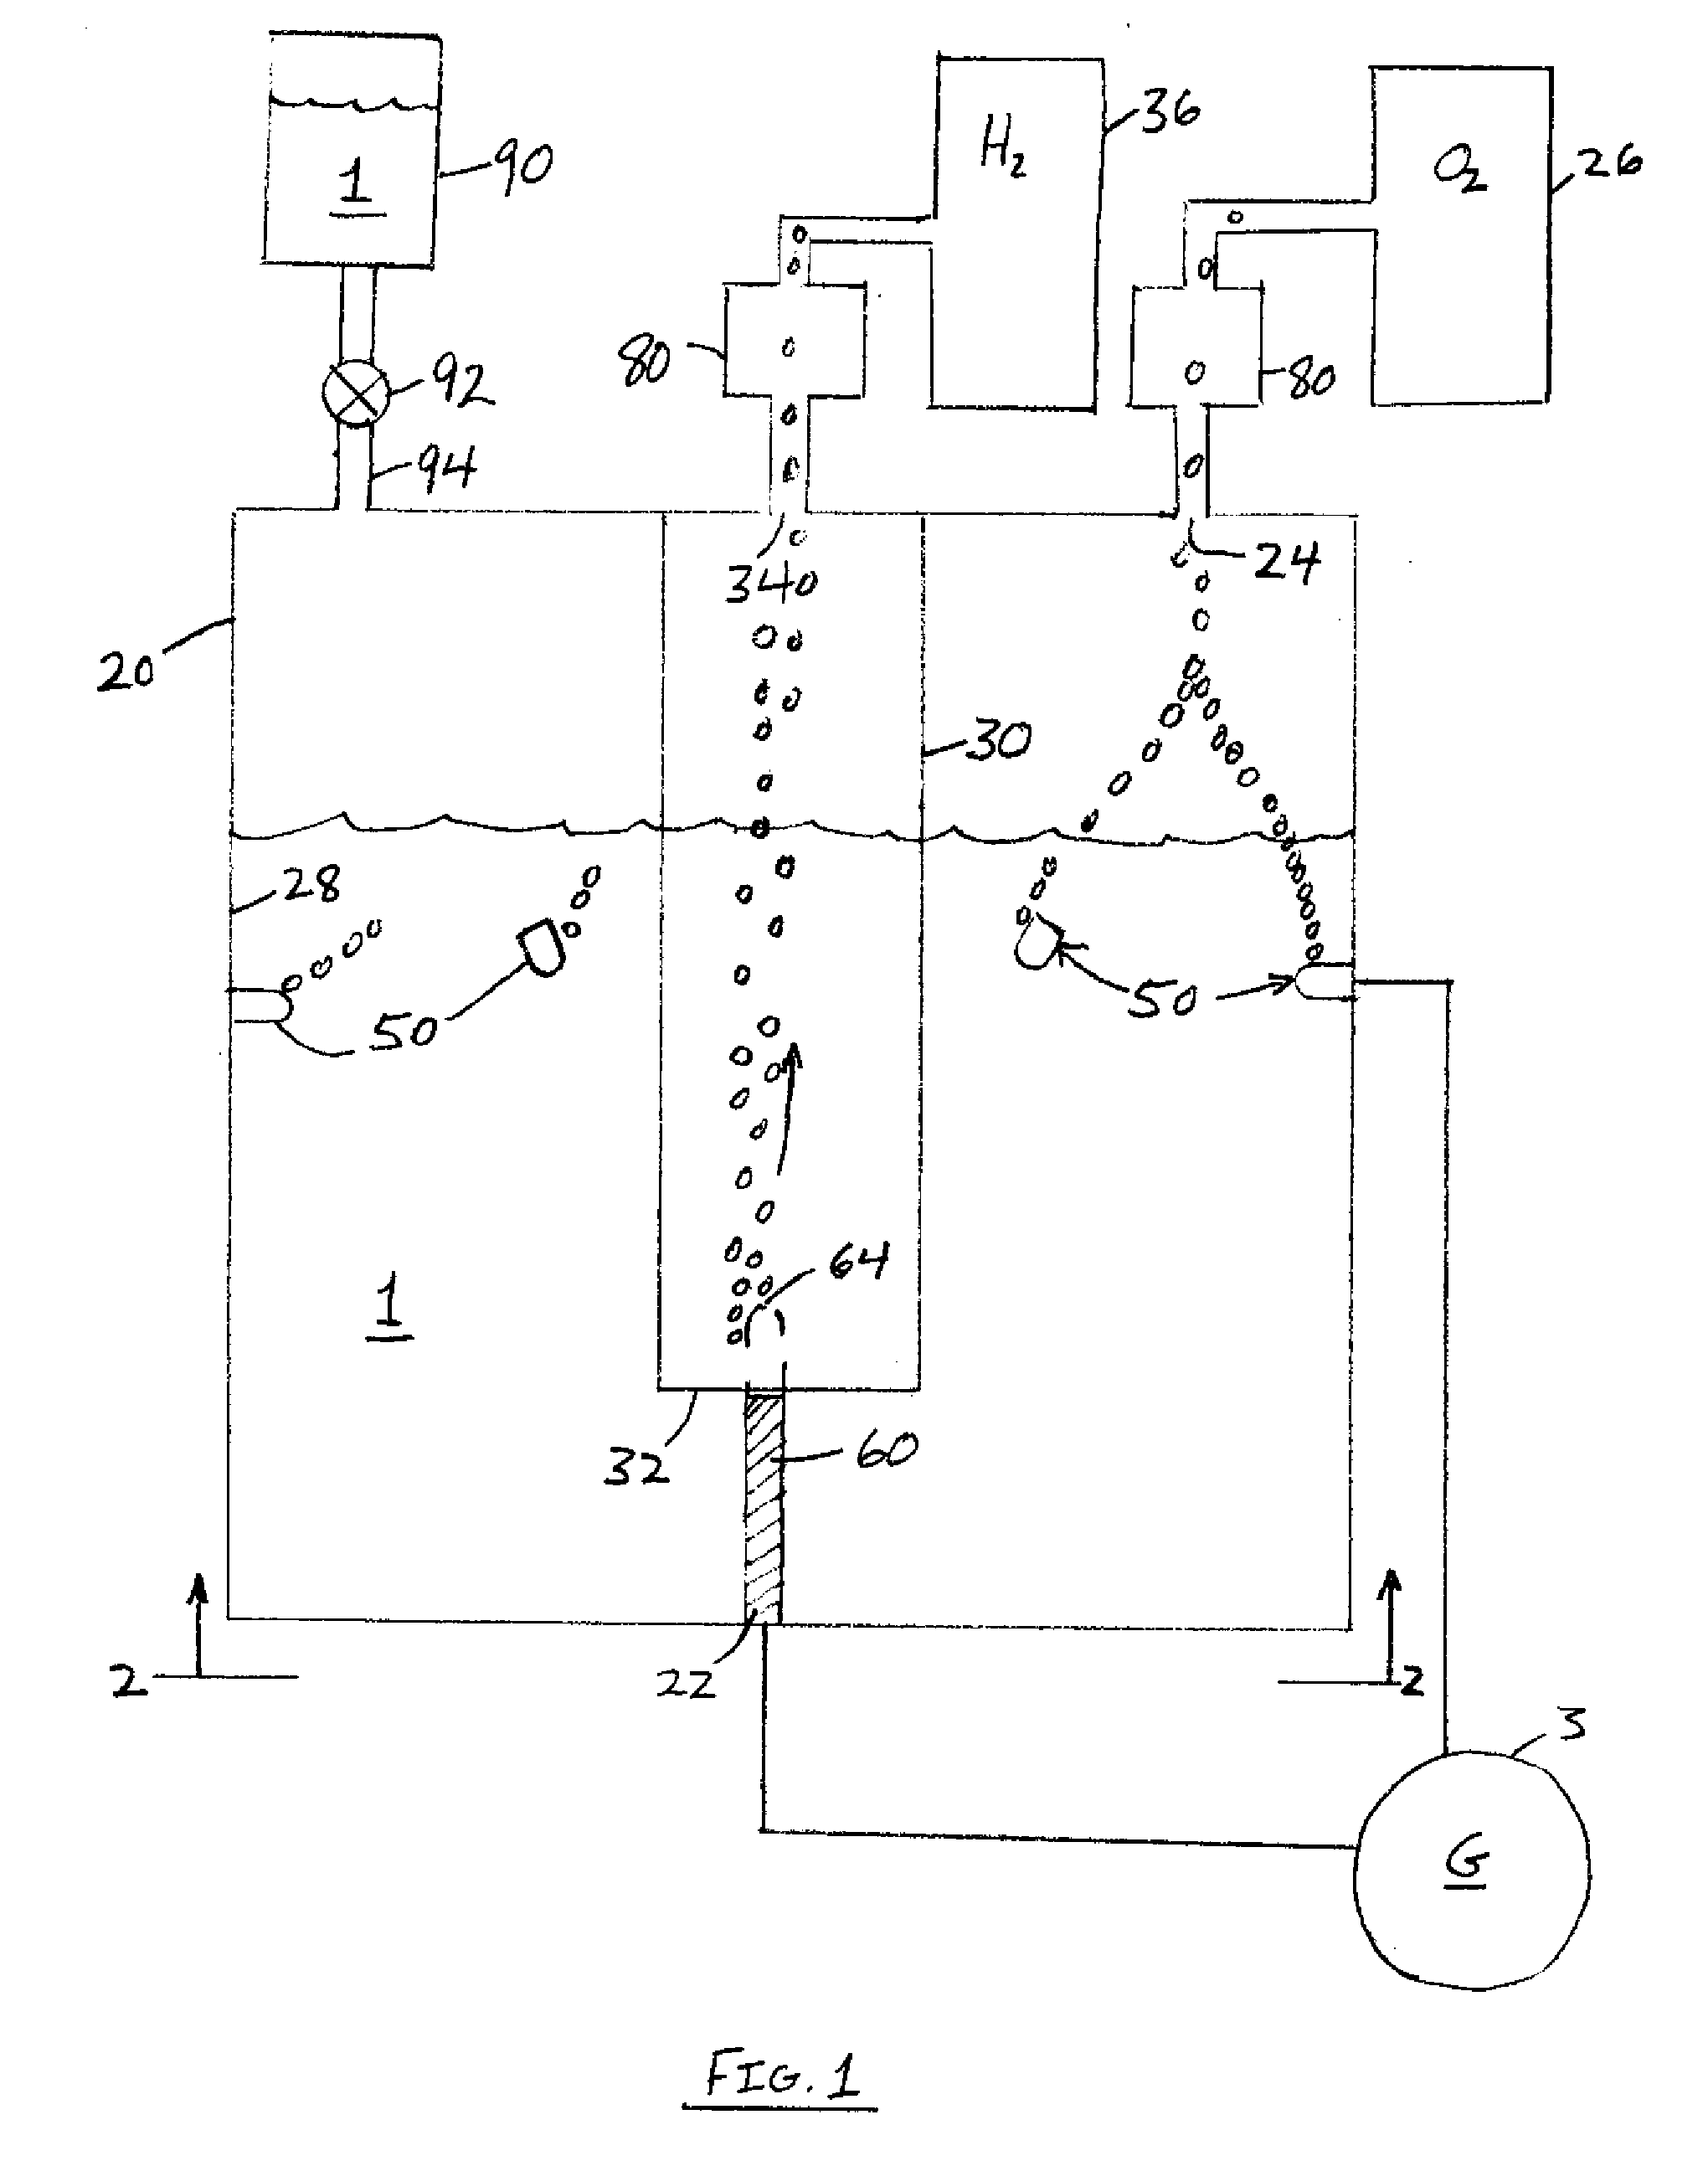 System and Method of Hydrogen and Oxygen Production